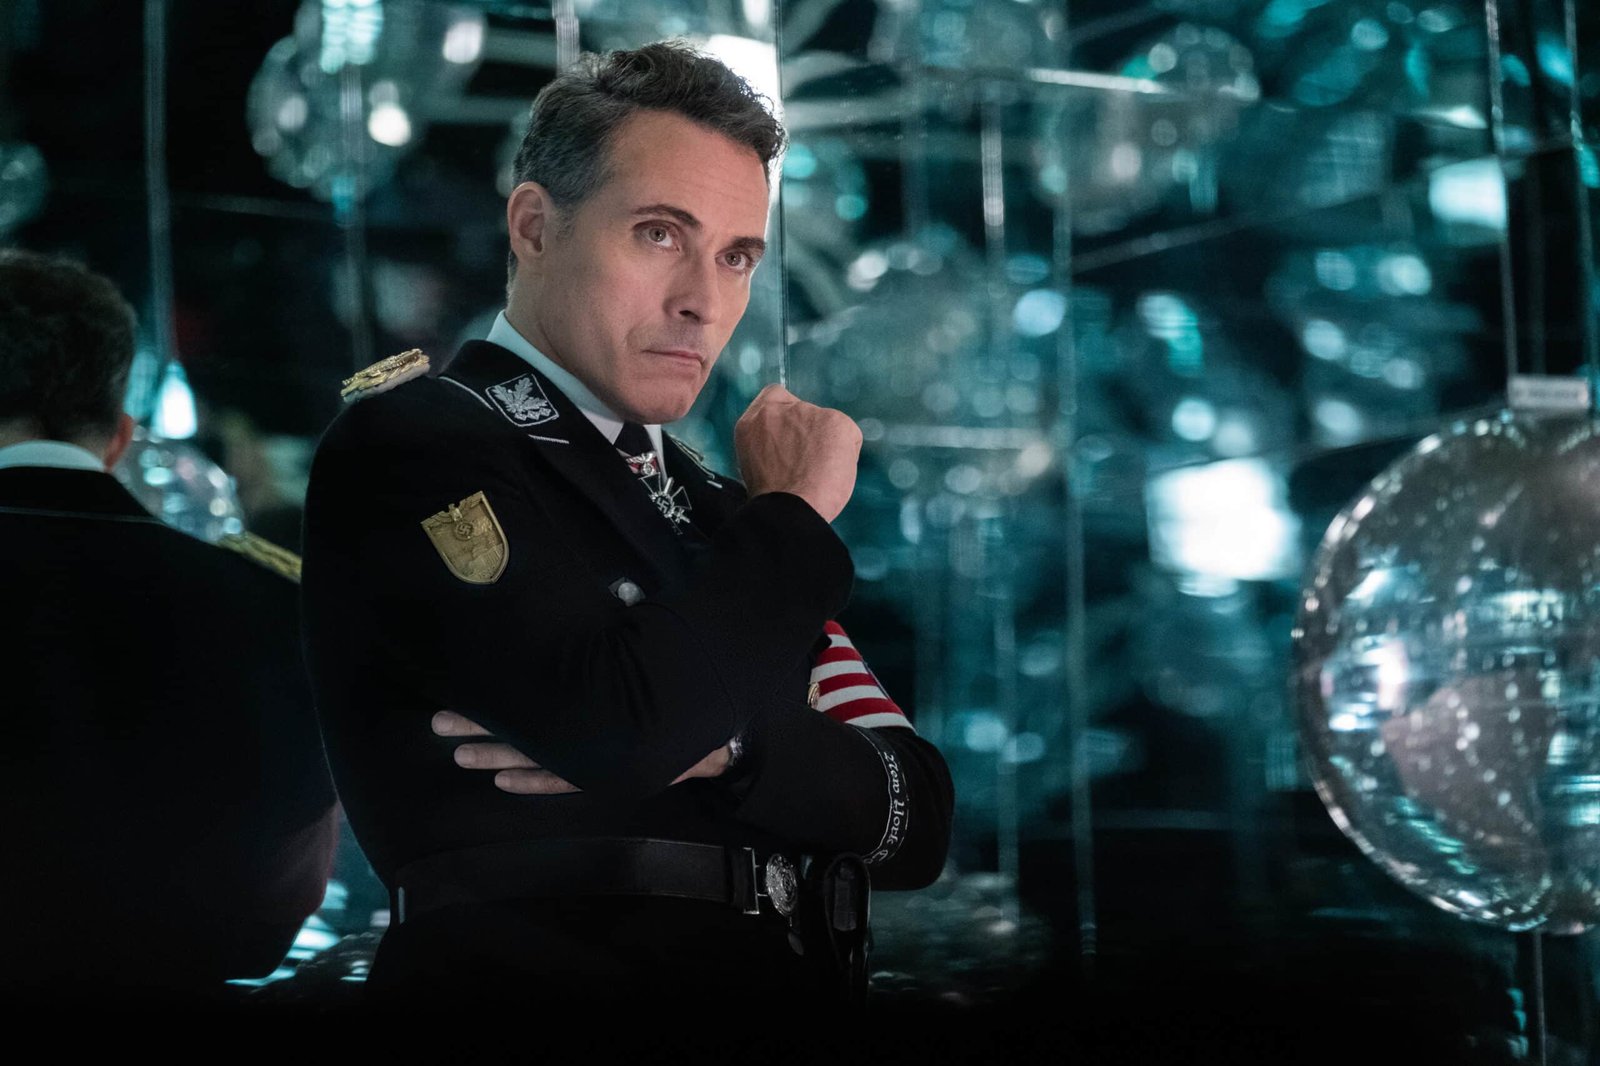 The Man in the High Castle Cast - Rufus Sewell as John Smith